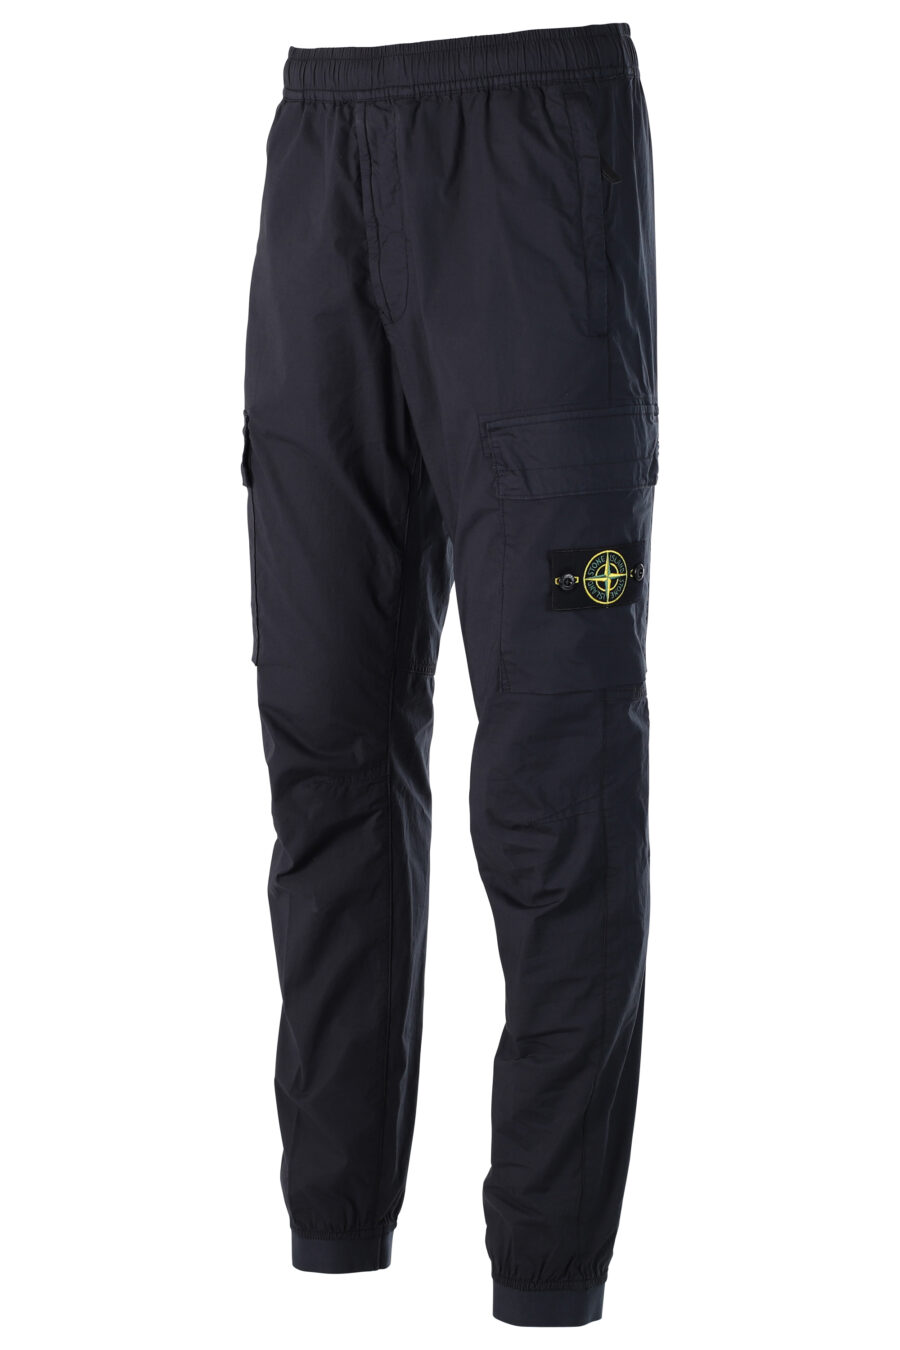 Dark blue cargo style trousers with snap and patch - 8052572510984 2